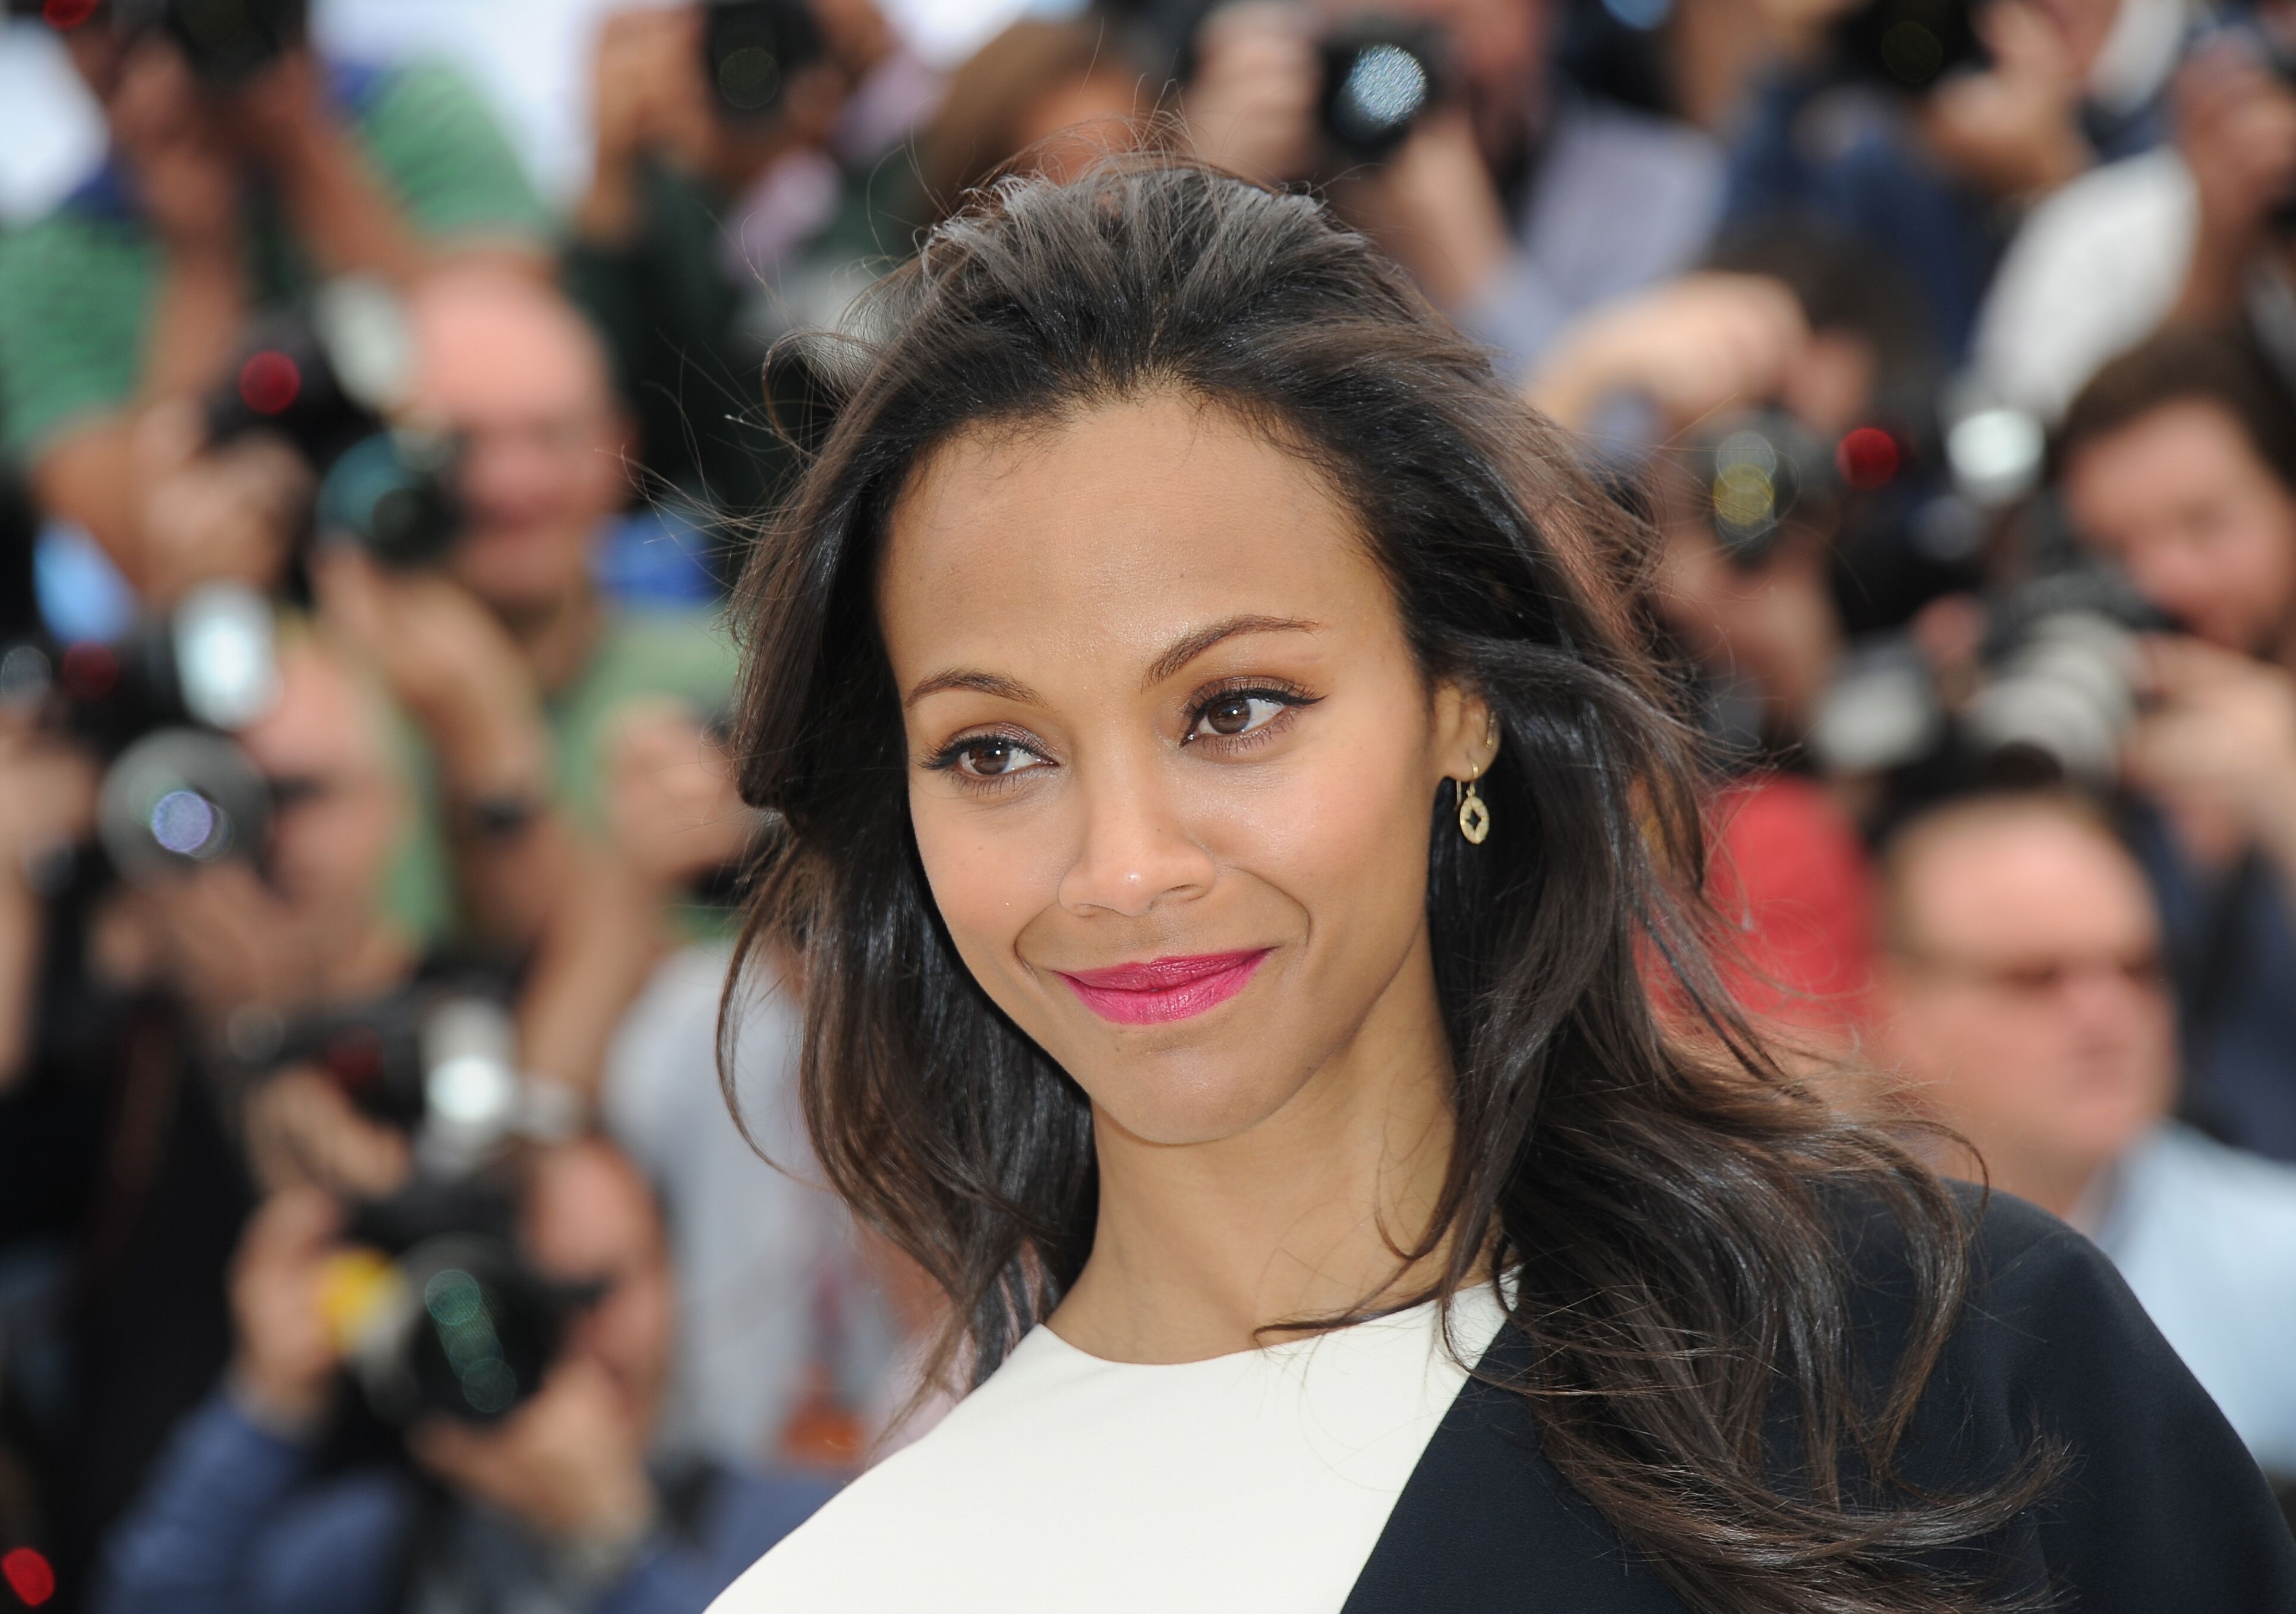 Zoe Saldana attends the photocall for “Blood Ties” at the 66th Annual Cannes Film Festival on May 20, 2013 in Cannes, France | Source: Getty Images/GlobalImagesUkraine